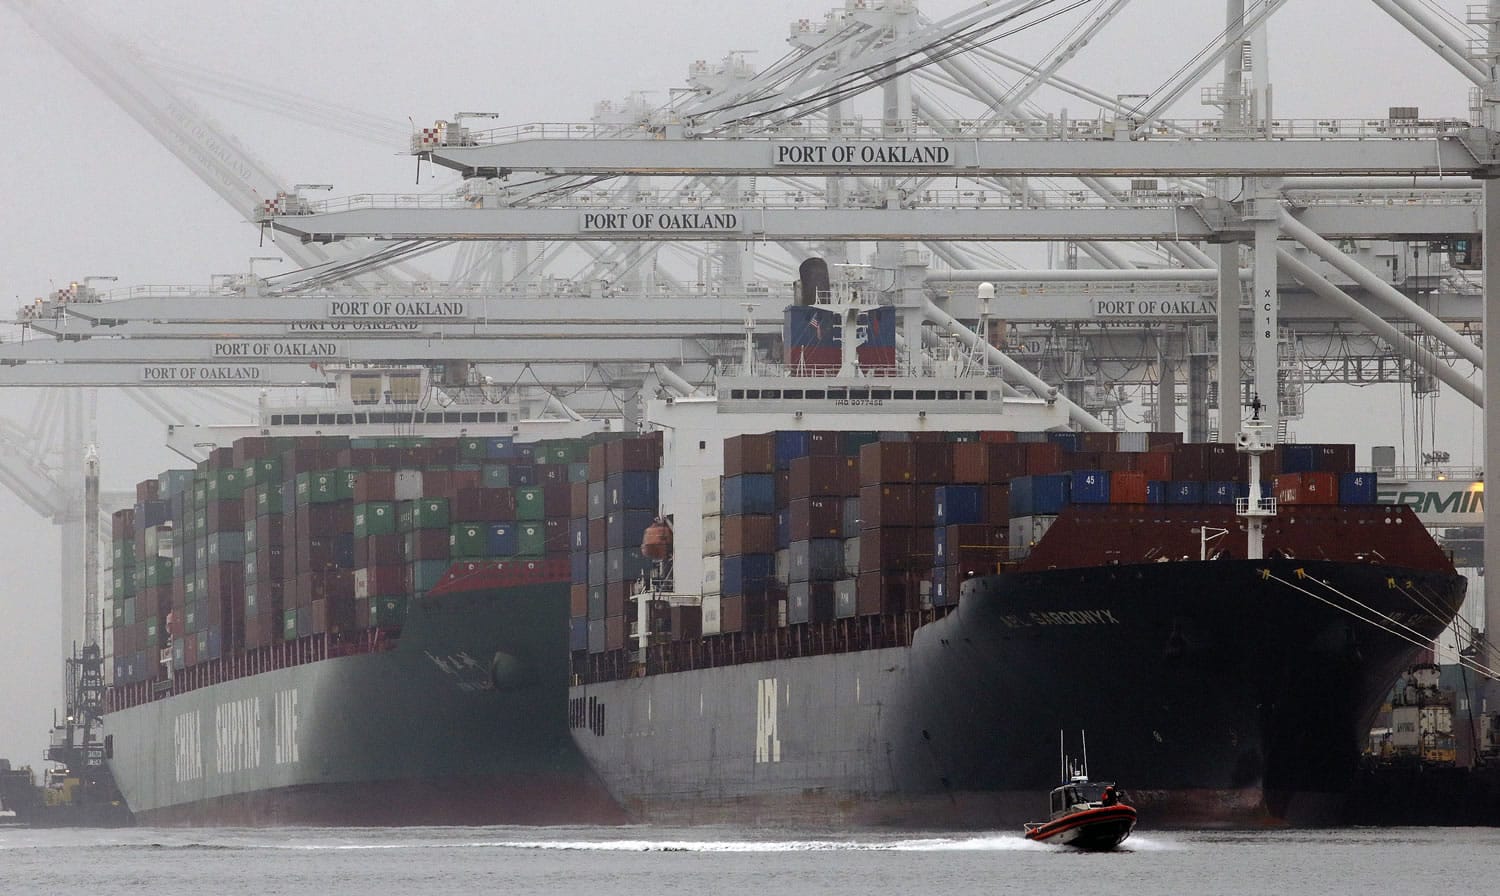 Container ships wait to be off-loaded at the Port of Oakland in Oakland, Calif. The West Coast ports that are Americais gateway for hundreds of billions of dollars of trade with Asia and beyond are no stranger to labor unrest and even violence.